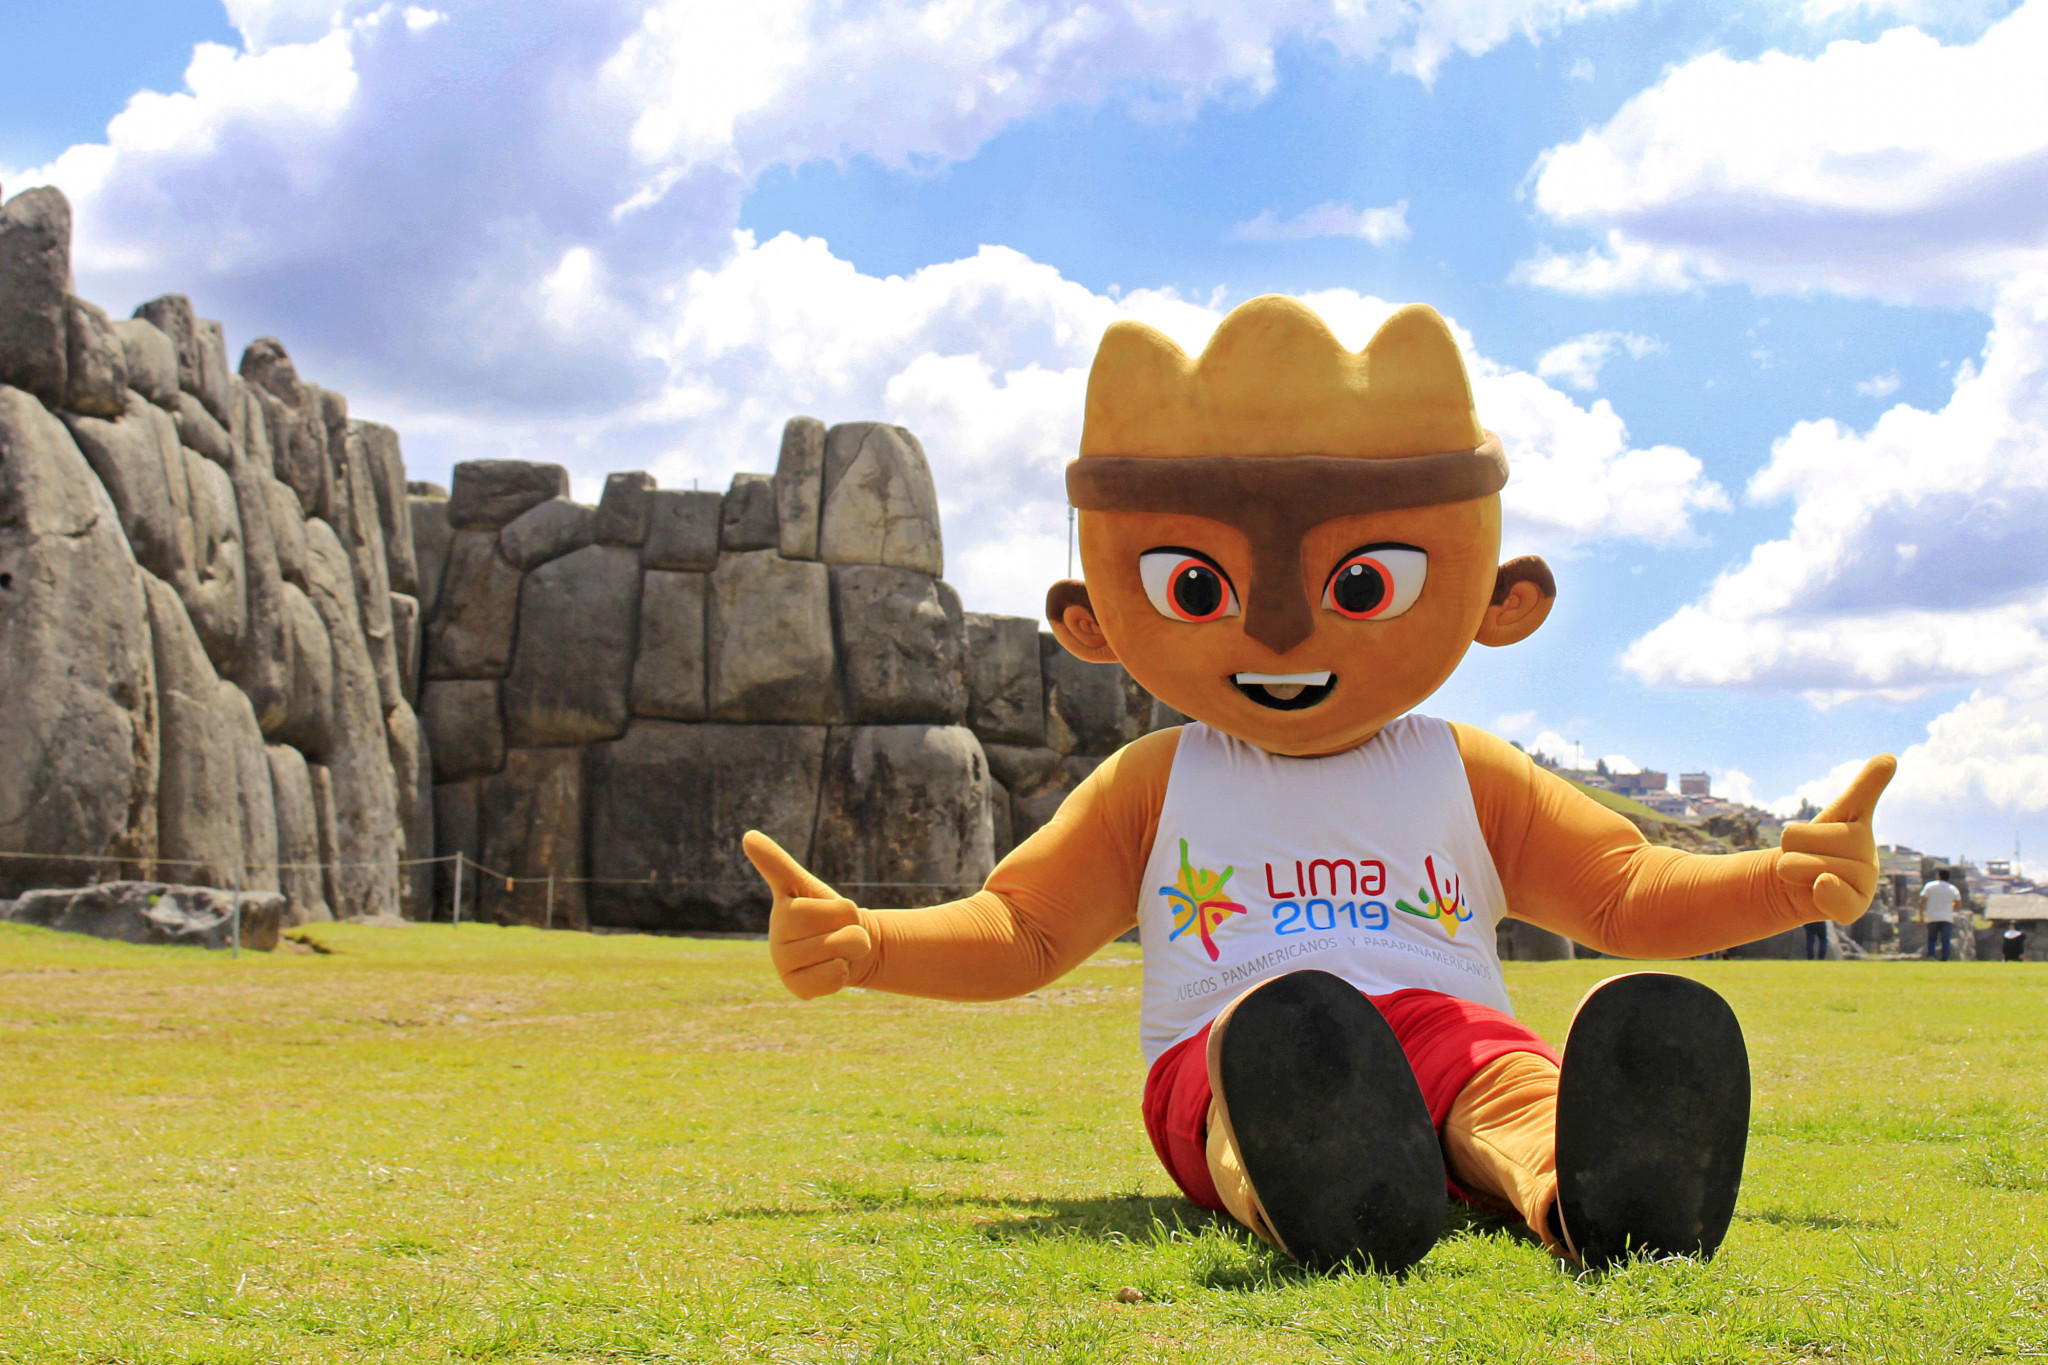 The Lima 2019 mascot has visited Cusco to spread enthusiasm for the event ©Lima 2019